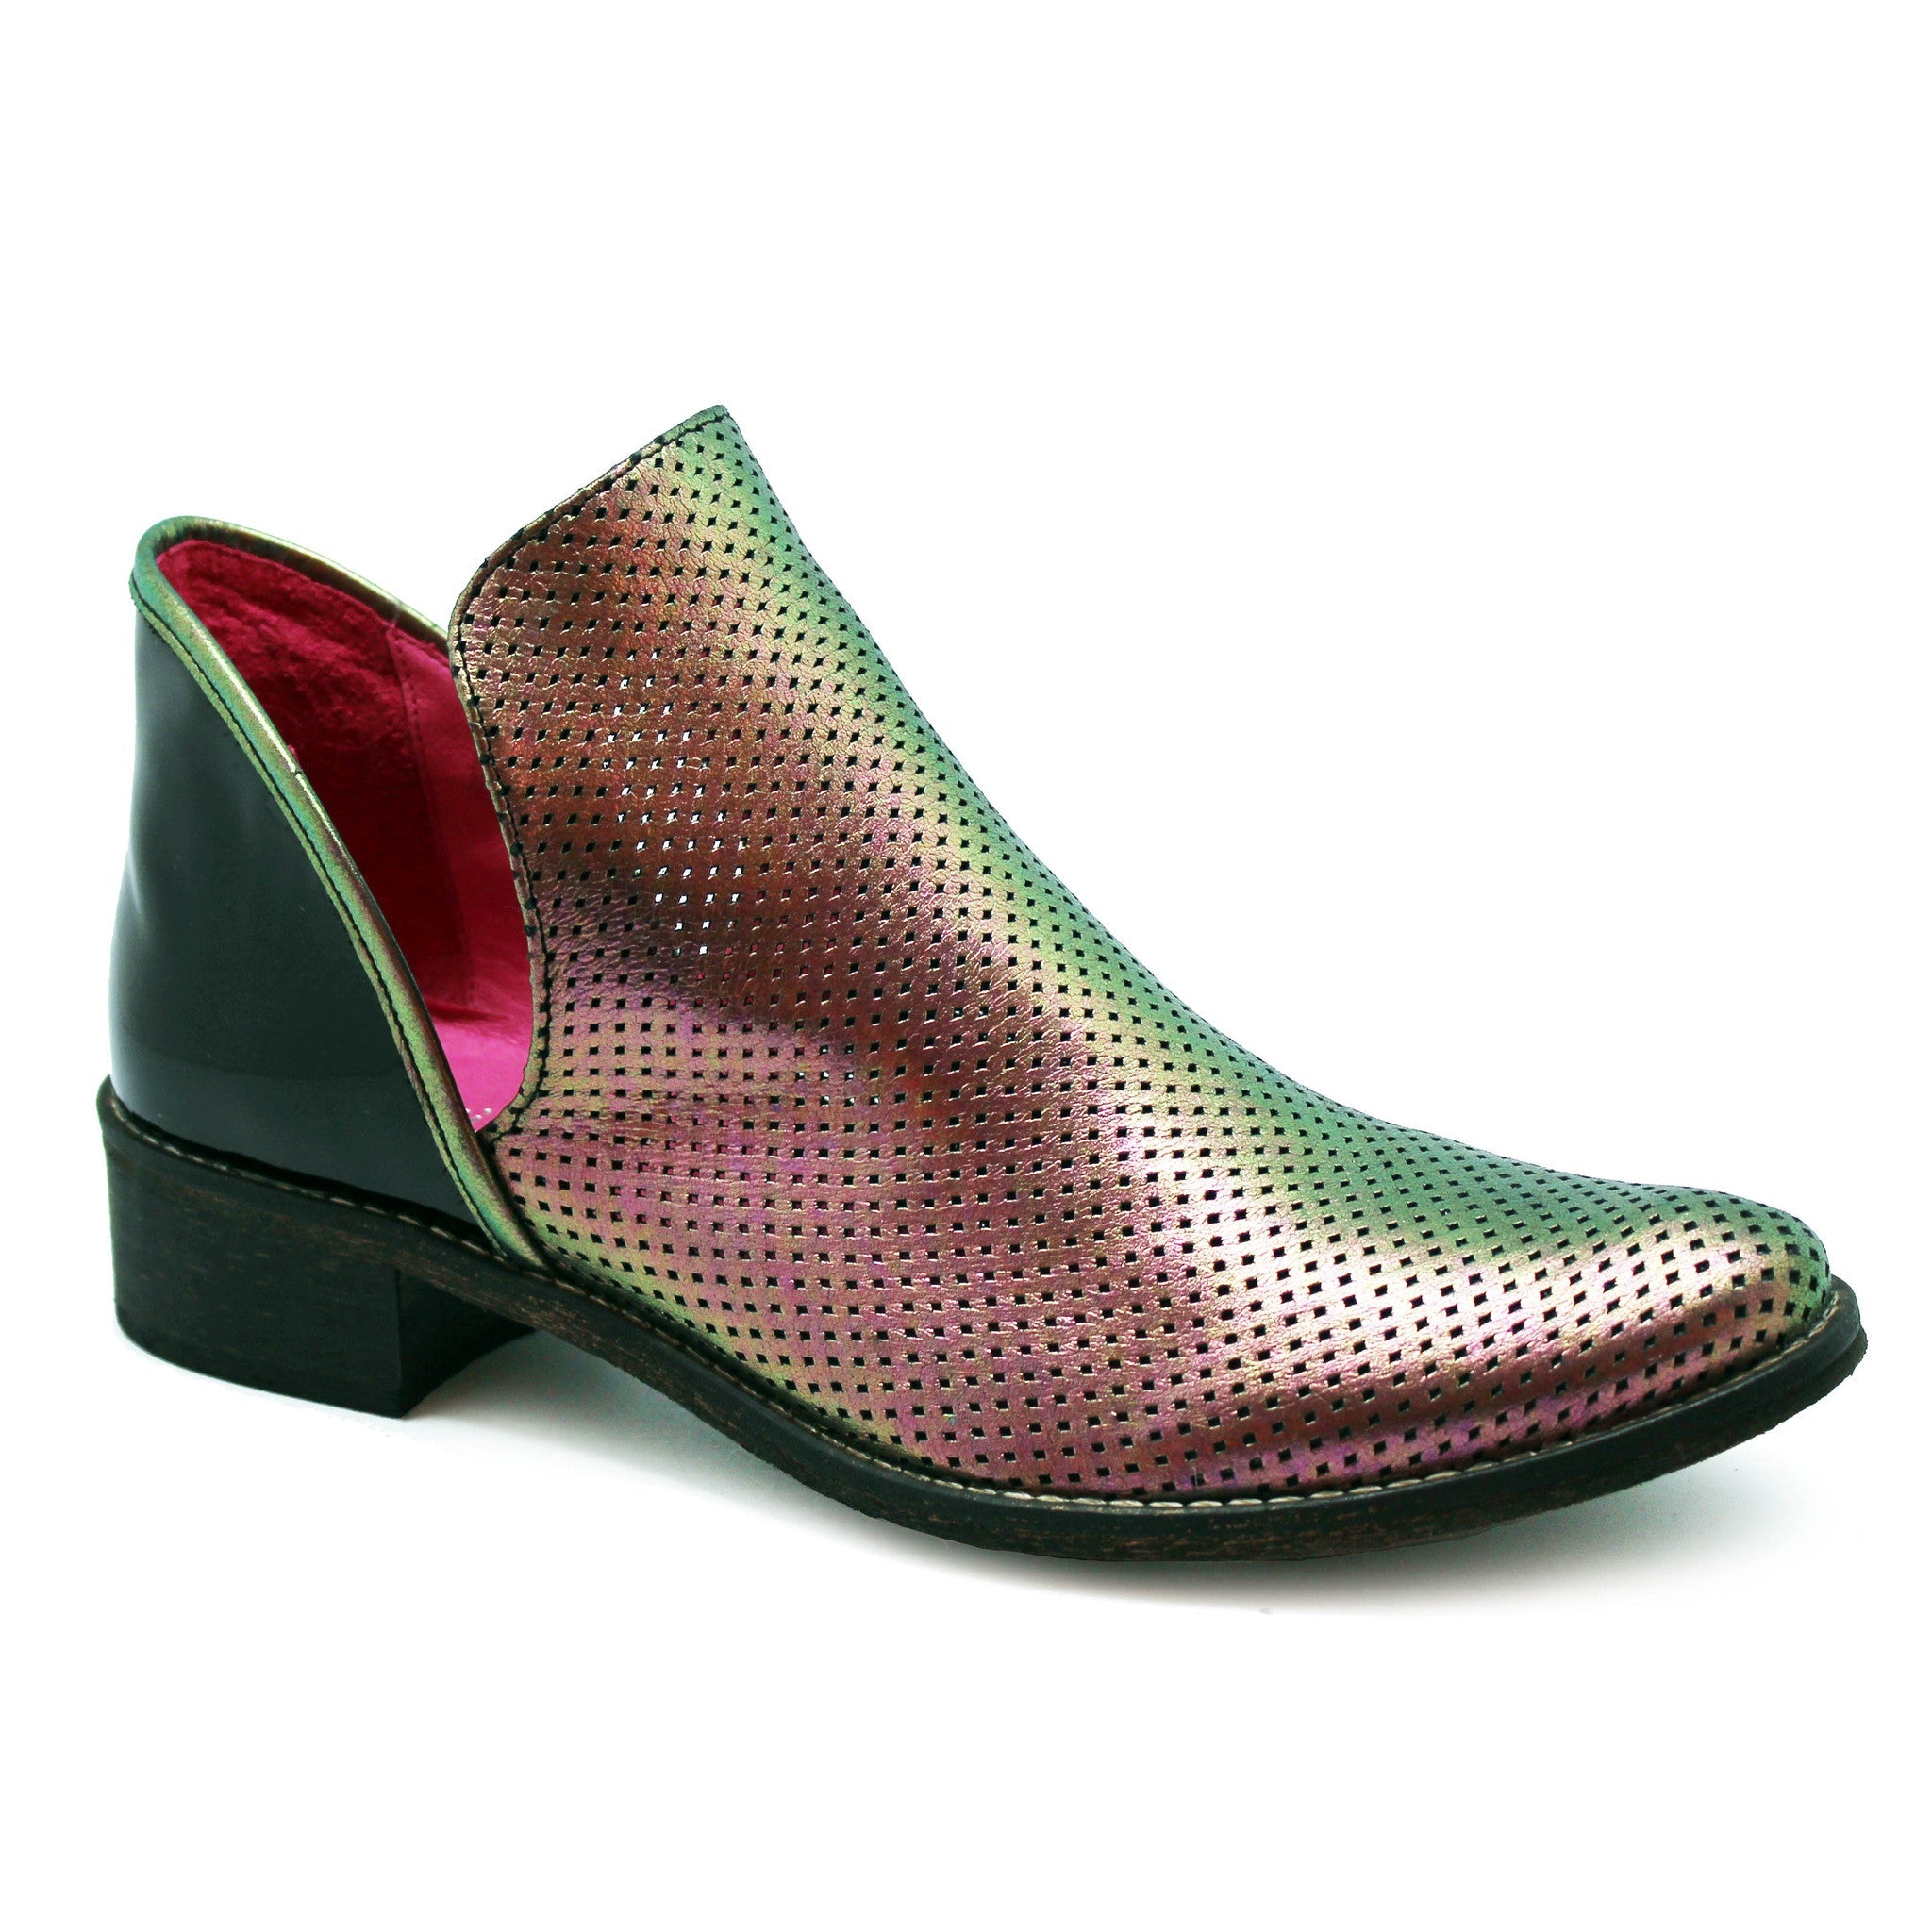 Zippette - Iridescent ankle boot - British D'sire